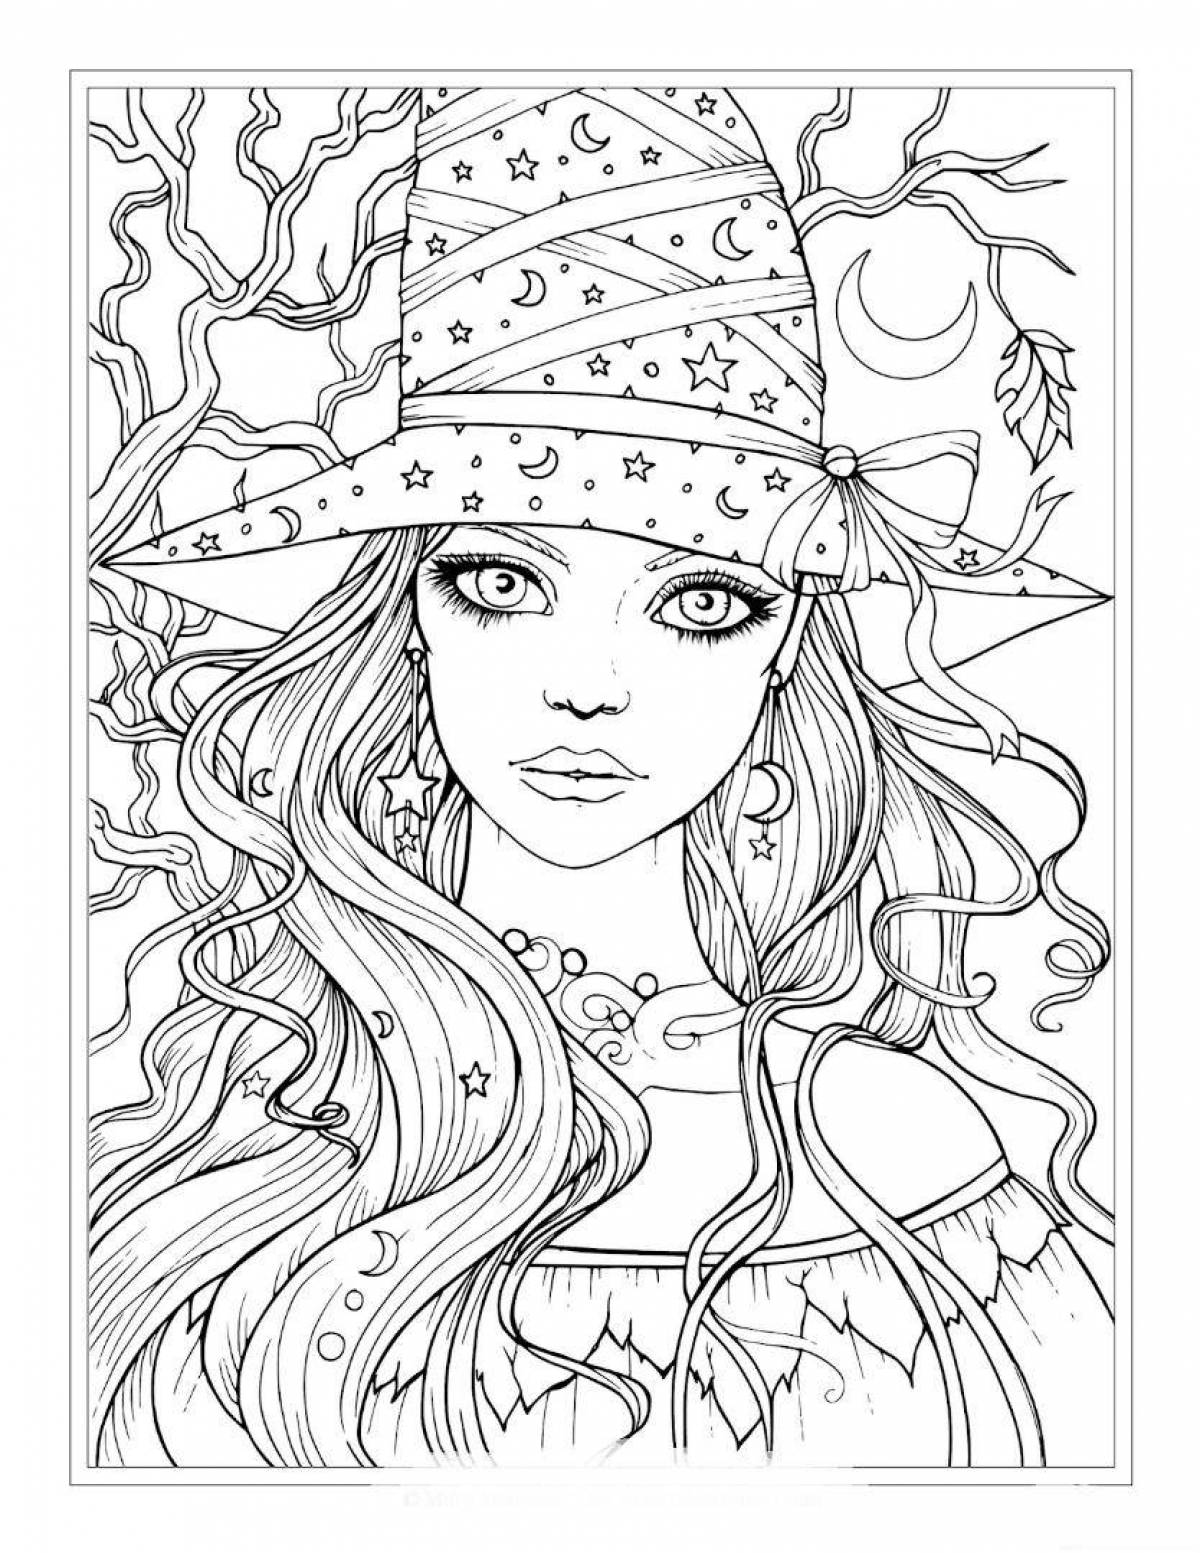 Shiny adult coloring page